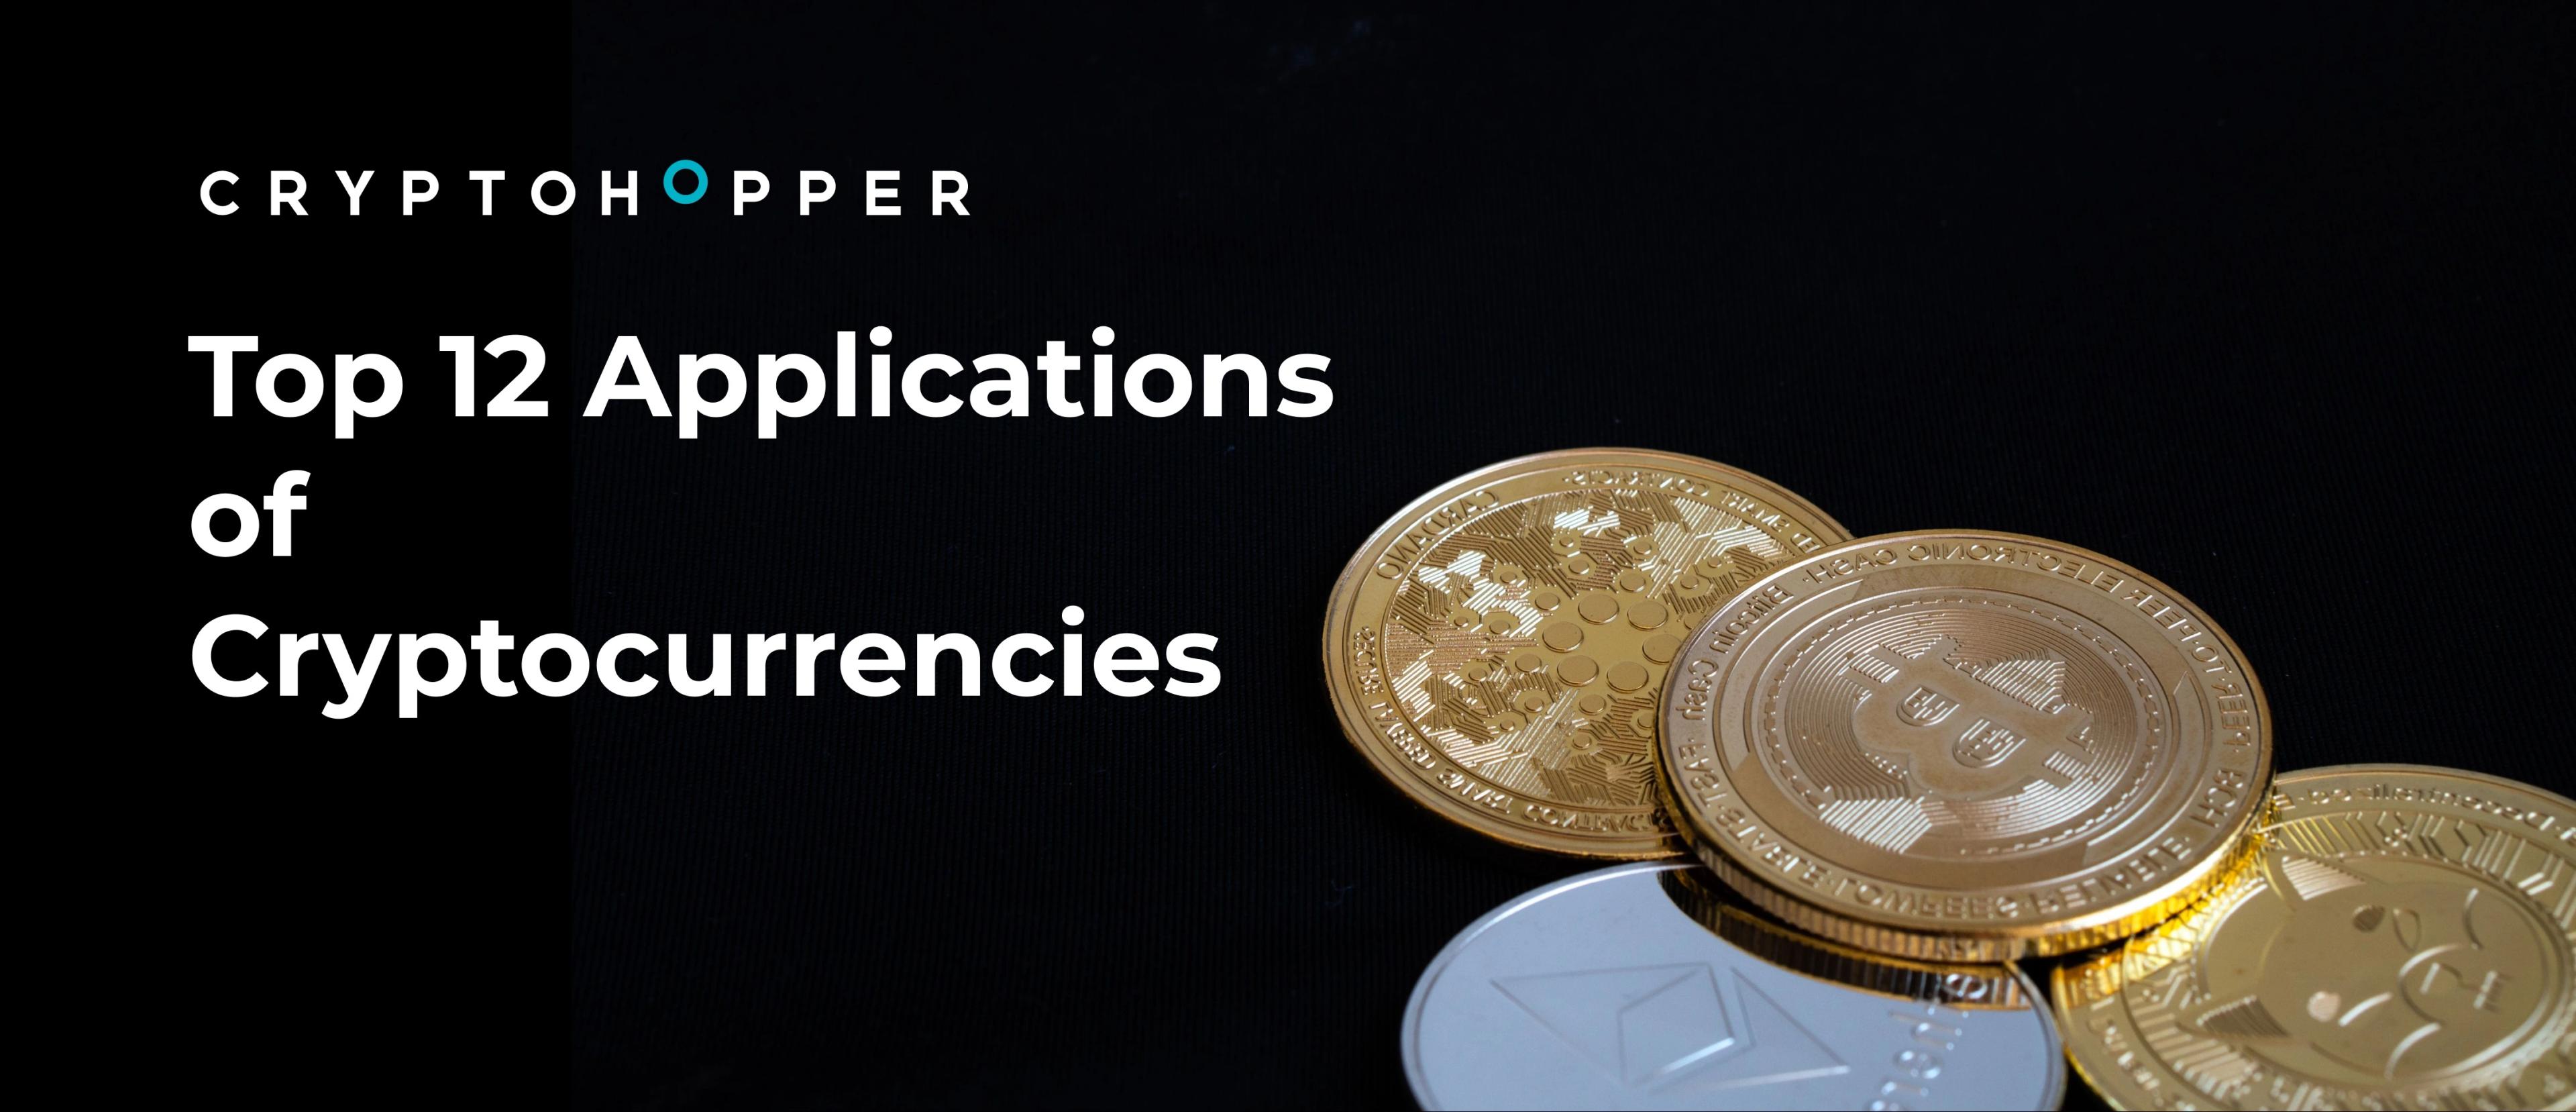 Top 12 Applications of Cryptocurrencies